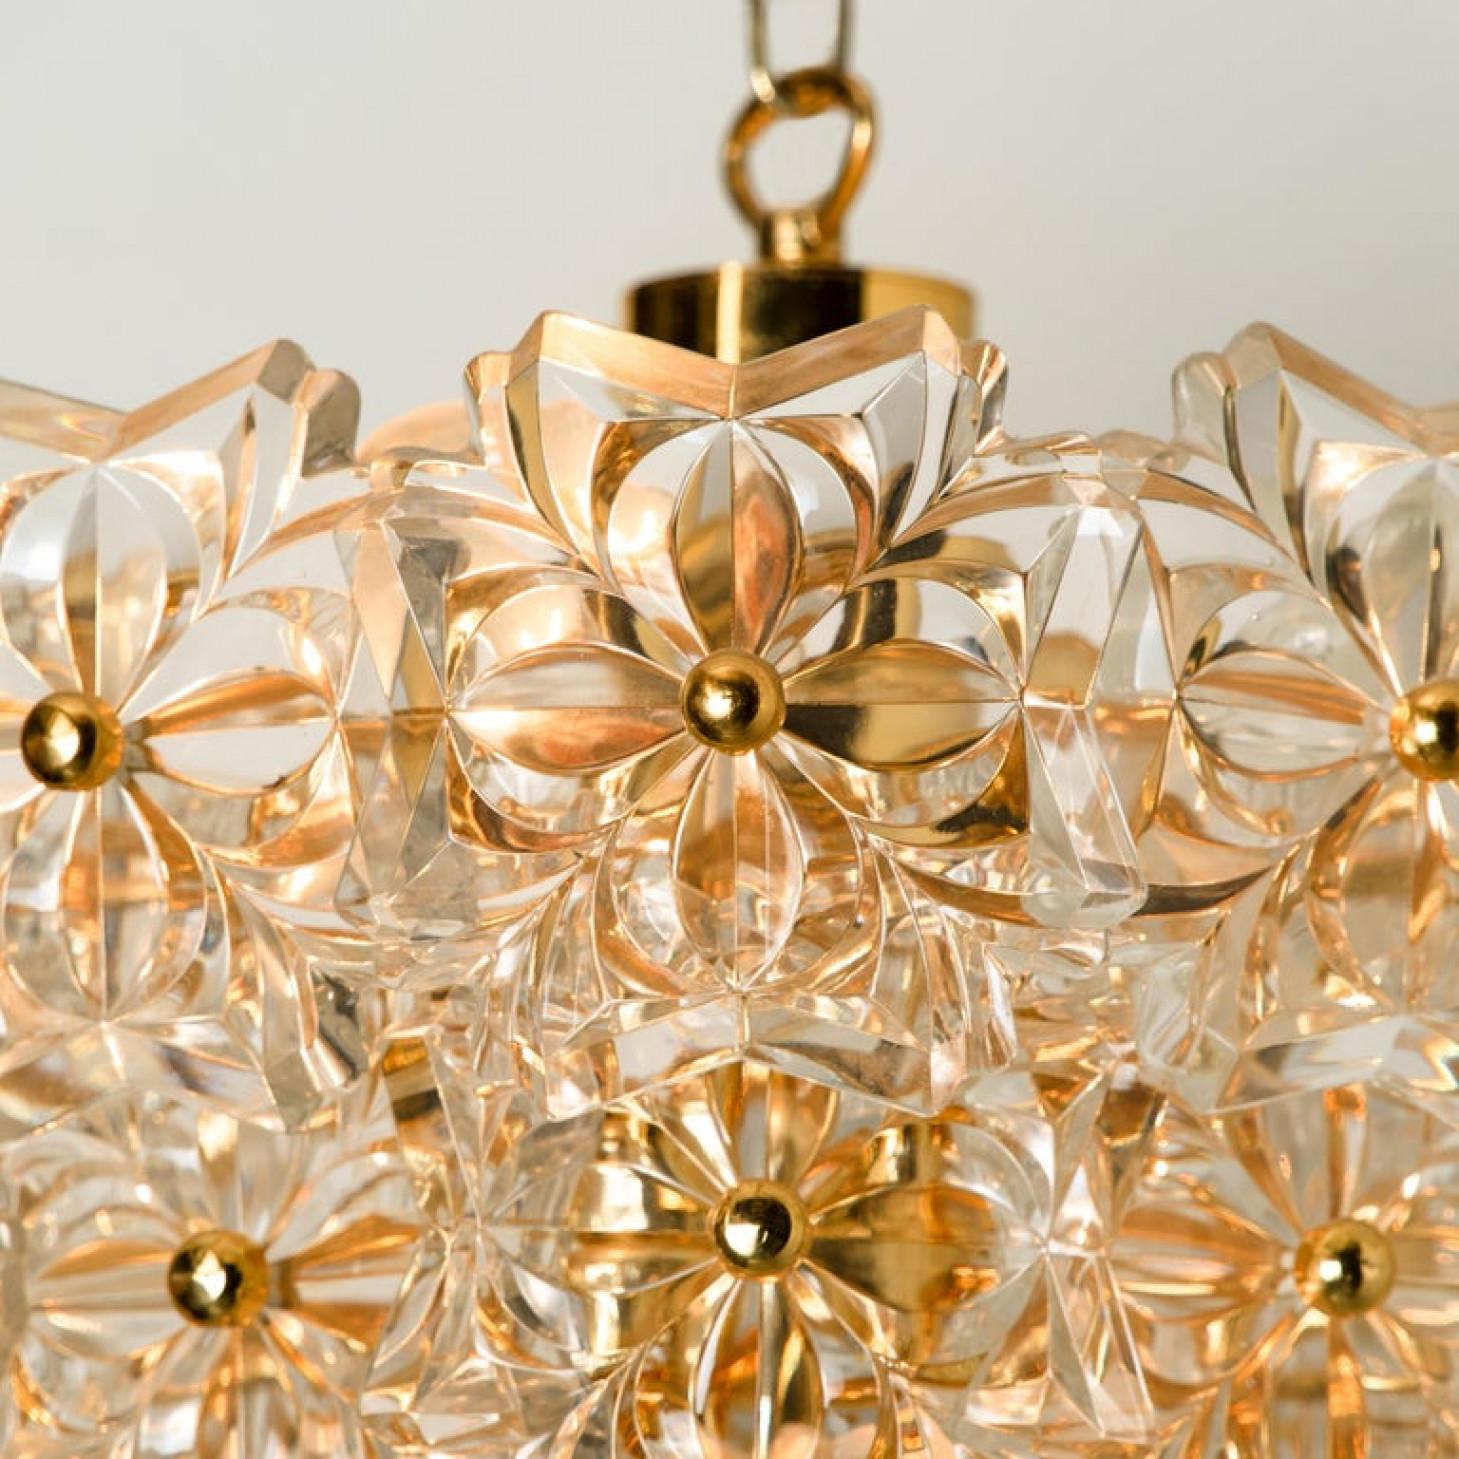 Pair of Glass and Brass Floral Three Tiers Light Fixture from Hillebrand, 1970s For Sale 1